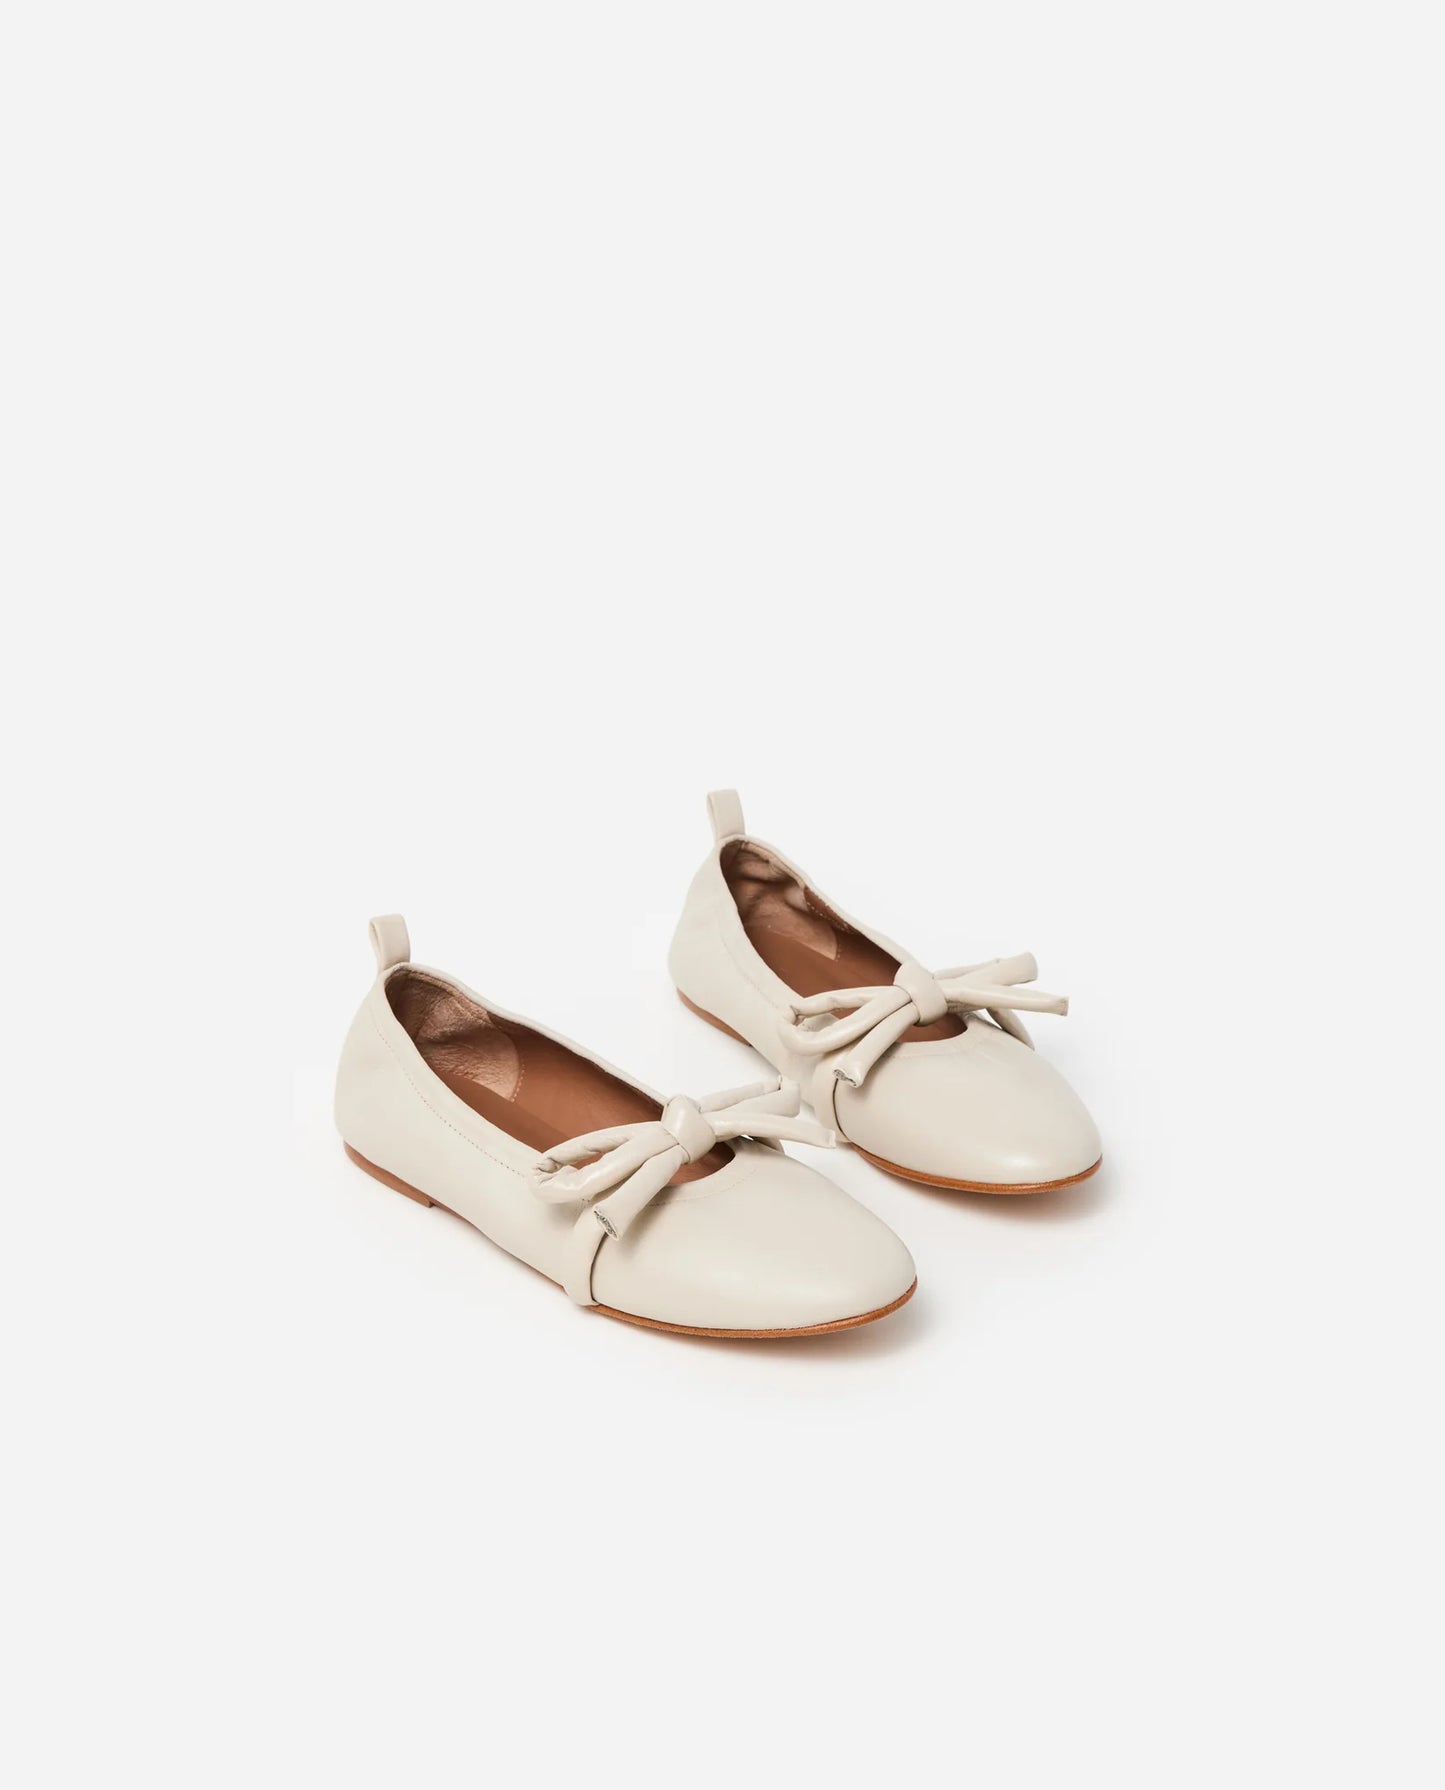 Polly Leather Creme Flats